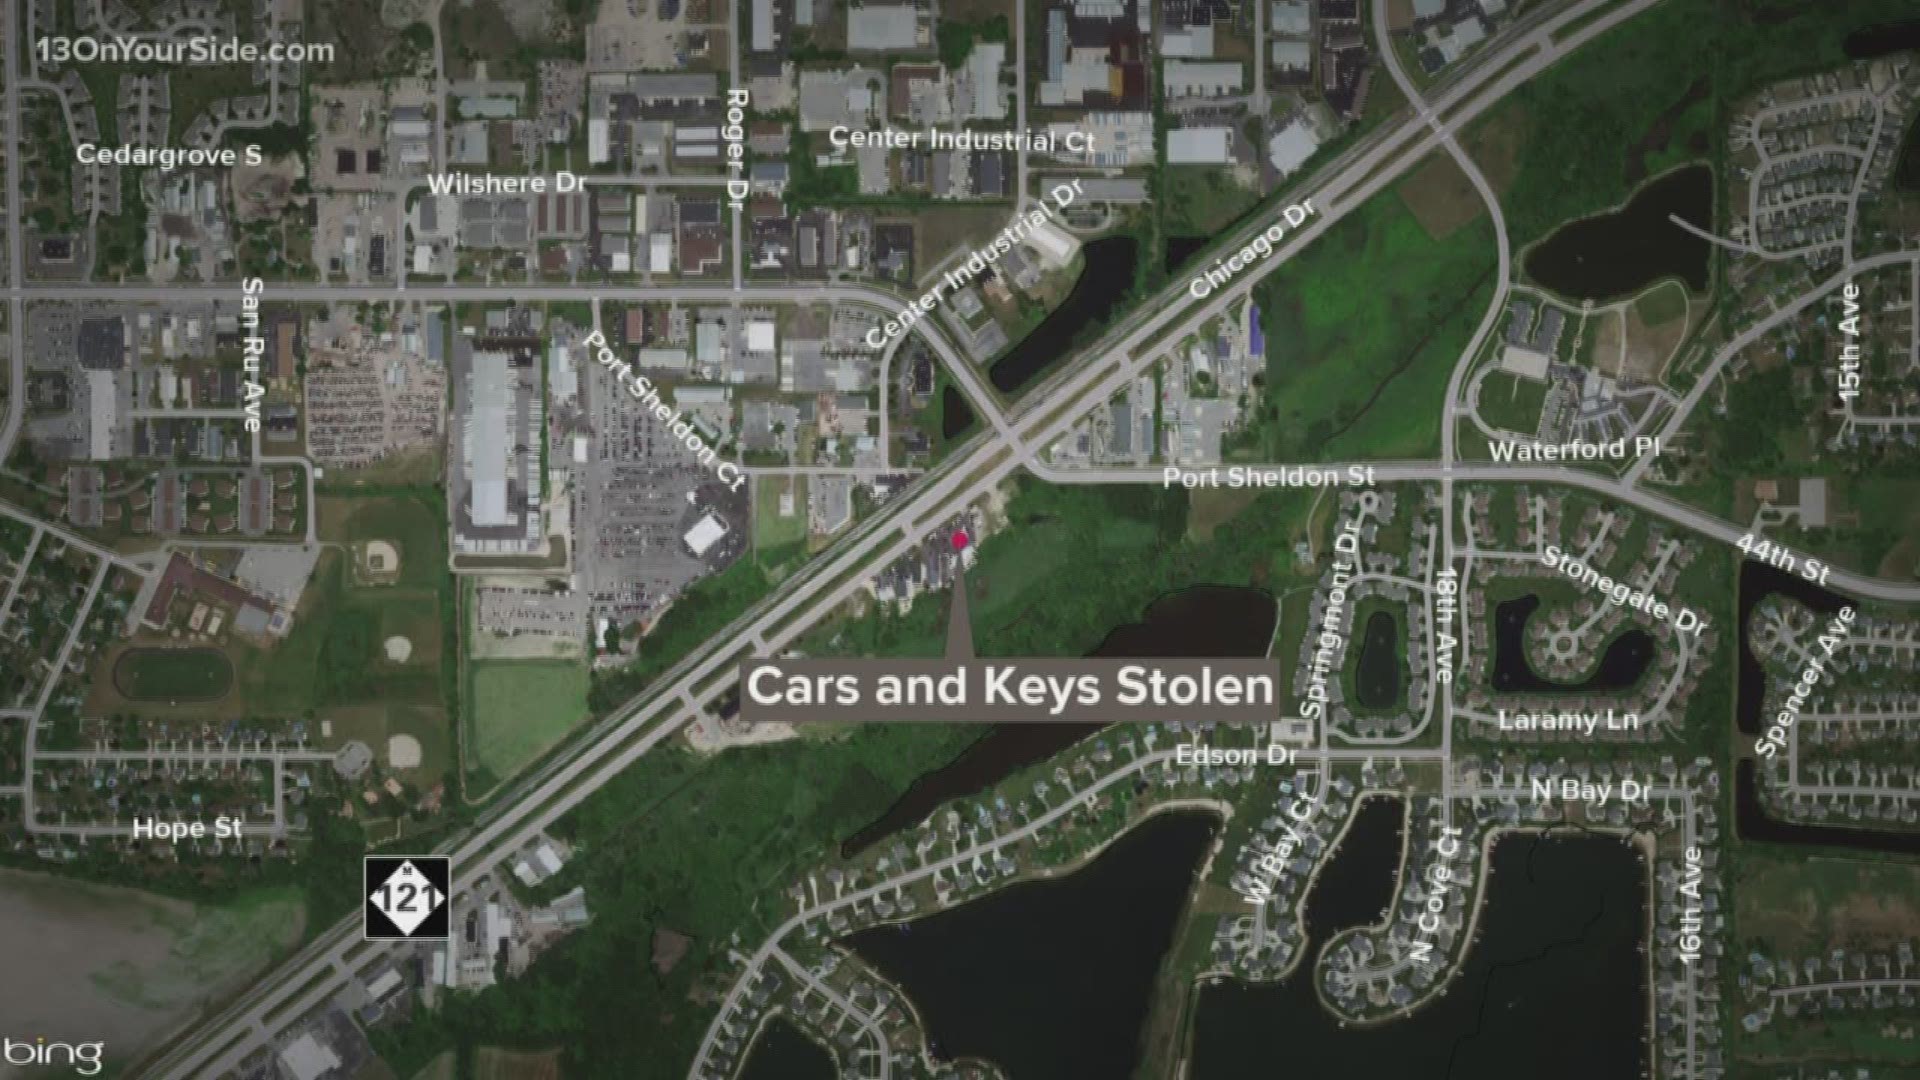 No arrests were made after thieves stole keys and at least two vehicles from an Ottawa County auto shop. Two vehicles were stolen from the auto shop, along with multiple sets of keys Wednesday, August 14.